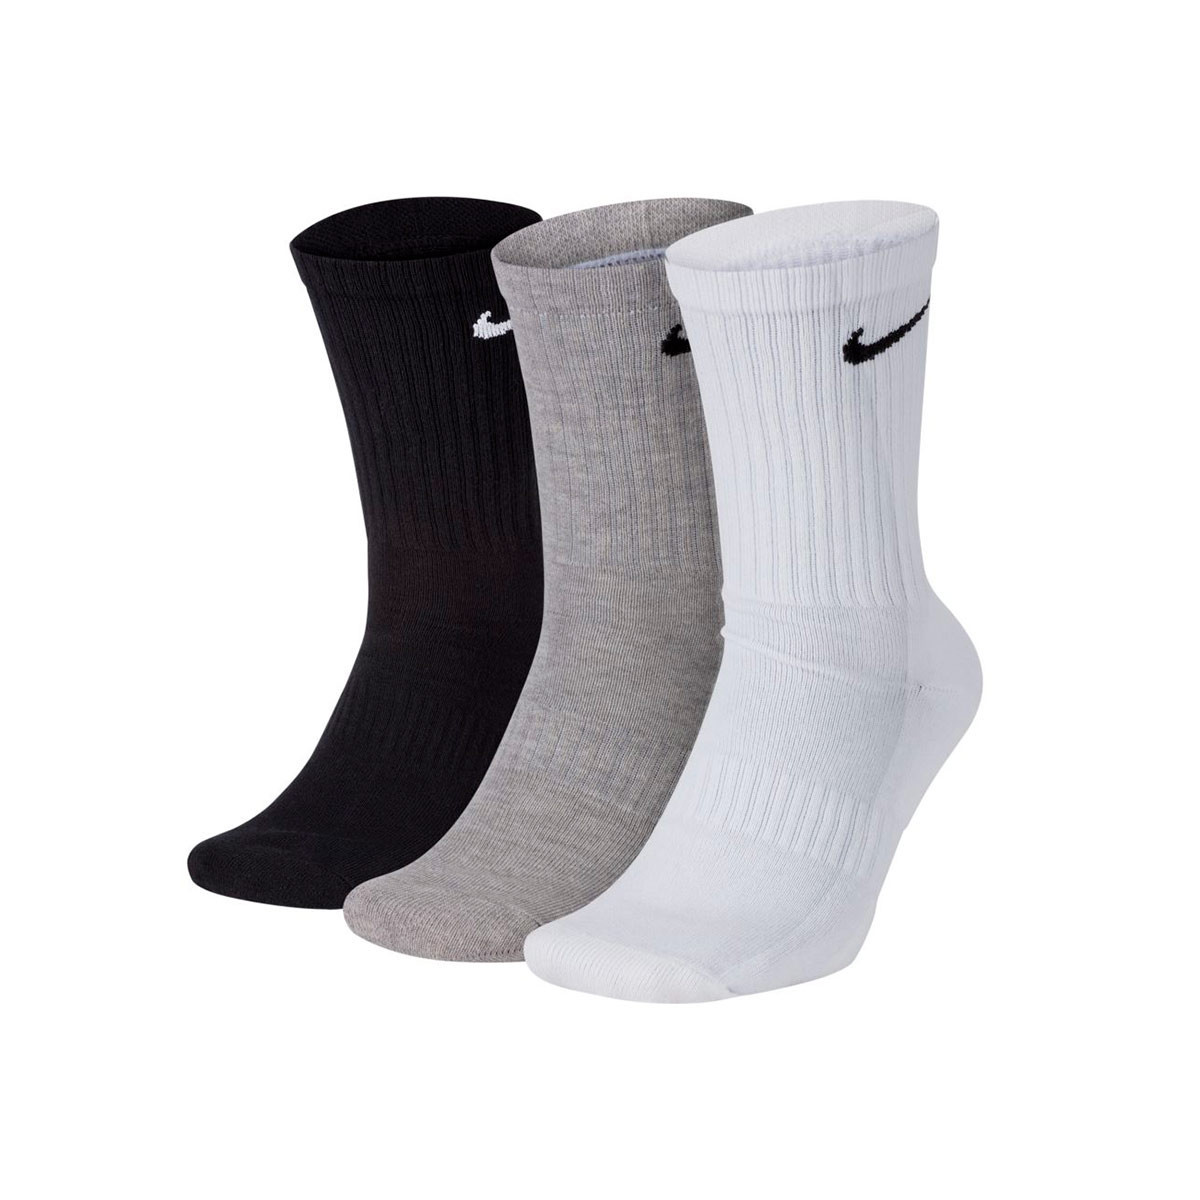 Calcetines Nike Everyday Cushioned Pares) Black-White-Grey - Fútbol Emotion